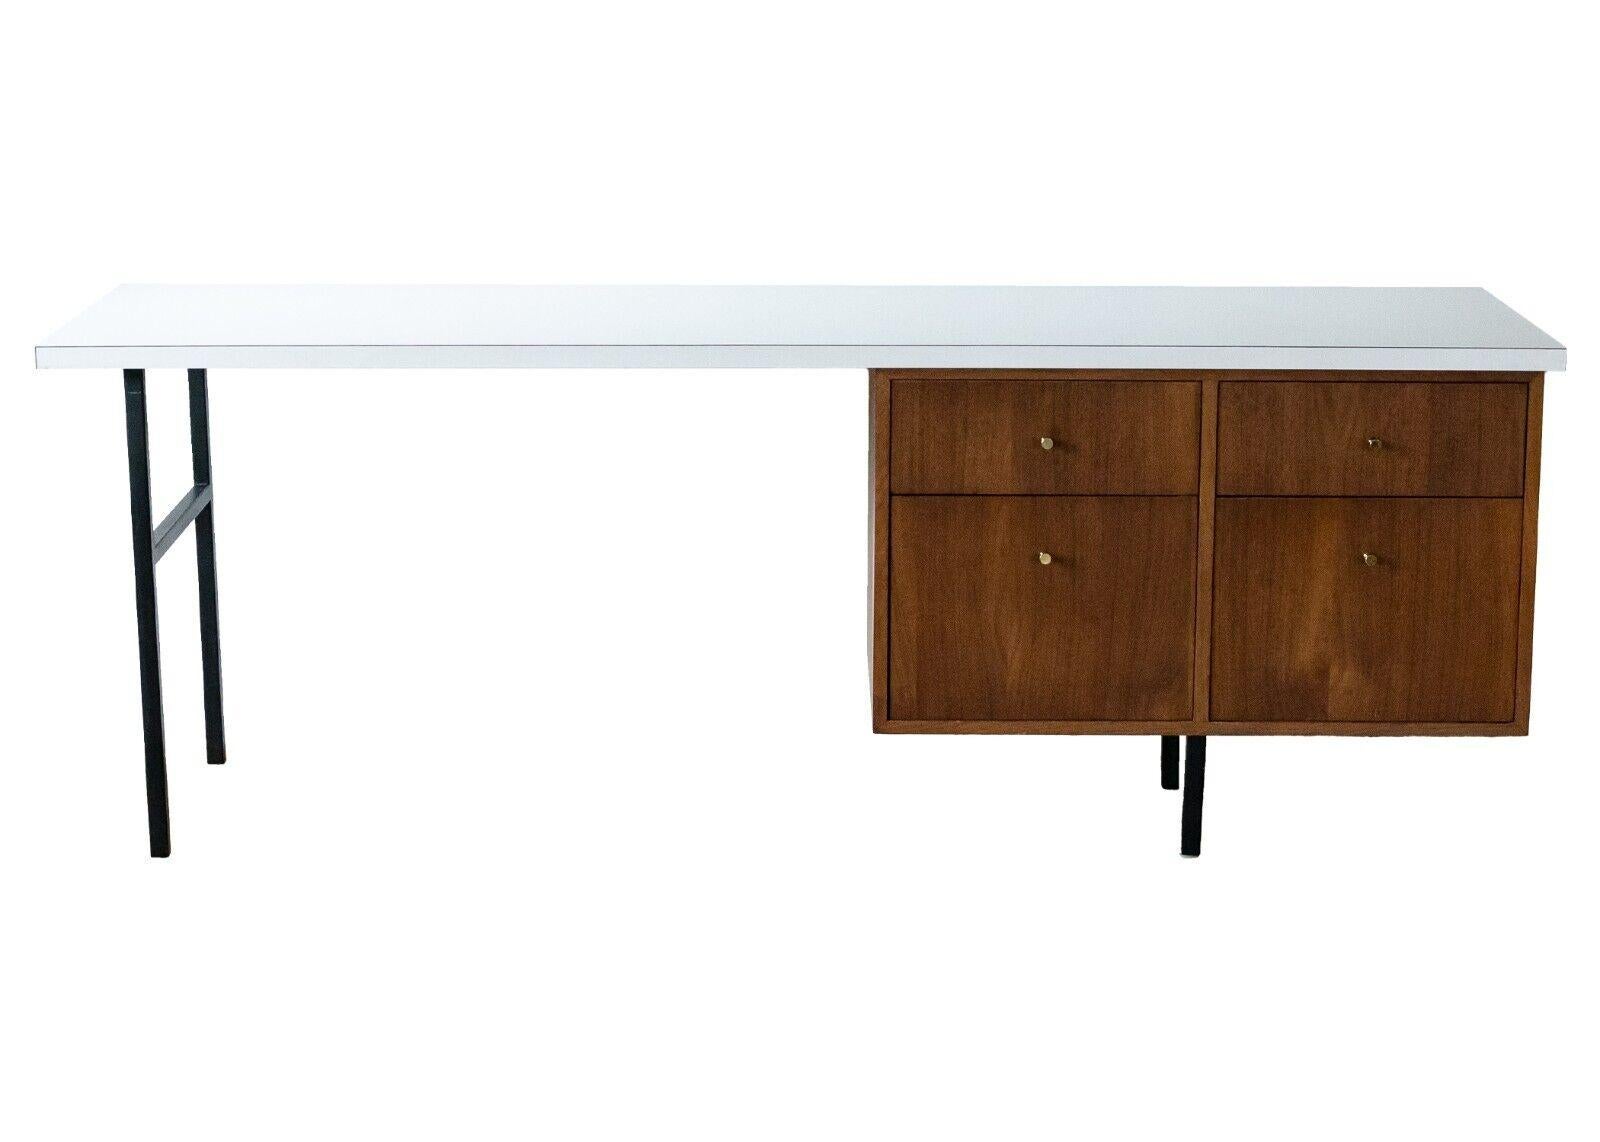 A rare George Nelson executive desk with secretary hutch by Herman Miller. This gorgeous, rare set of pieces are a statement for any office. The George Nelson executive desk features a clean white top and sides with matte black metal legs. The legs